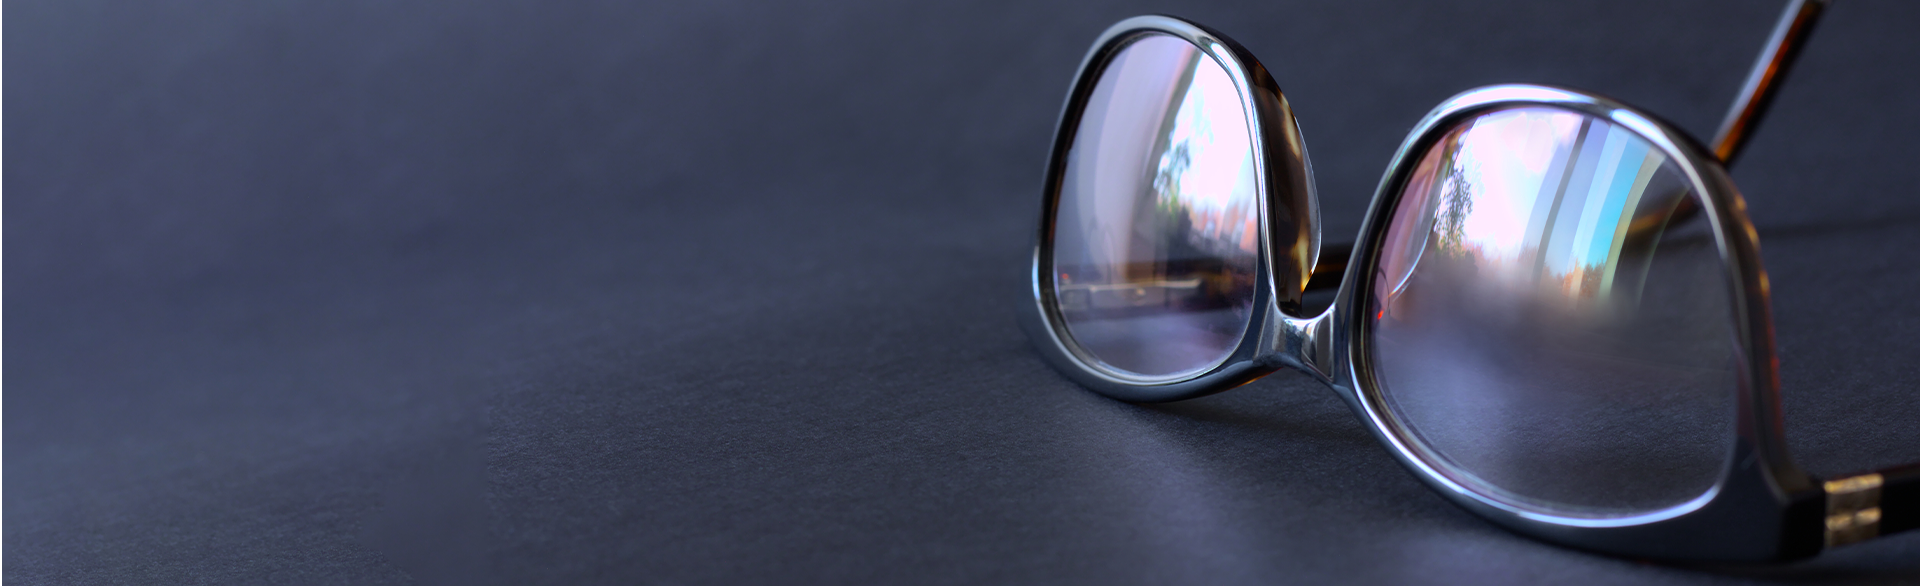 Anti-Reflective Coating on Glasses: Is It Worth It?